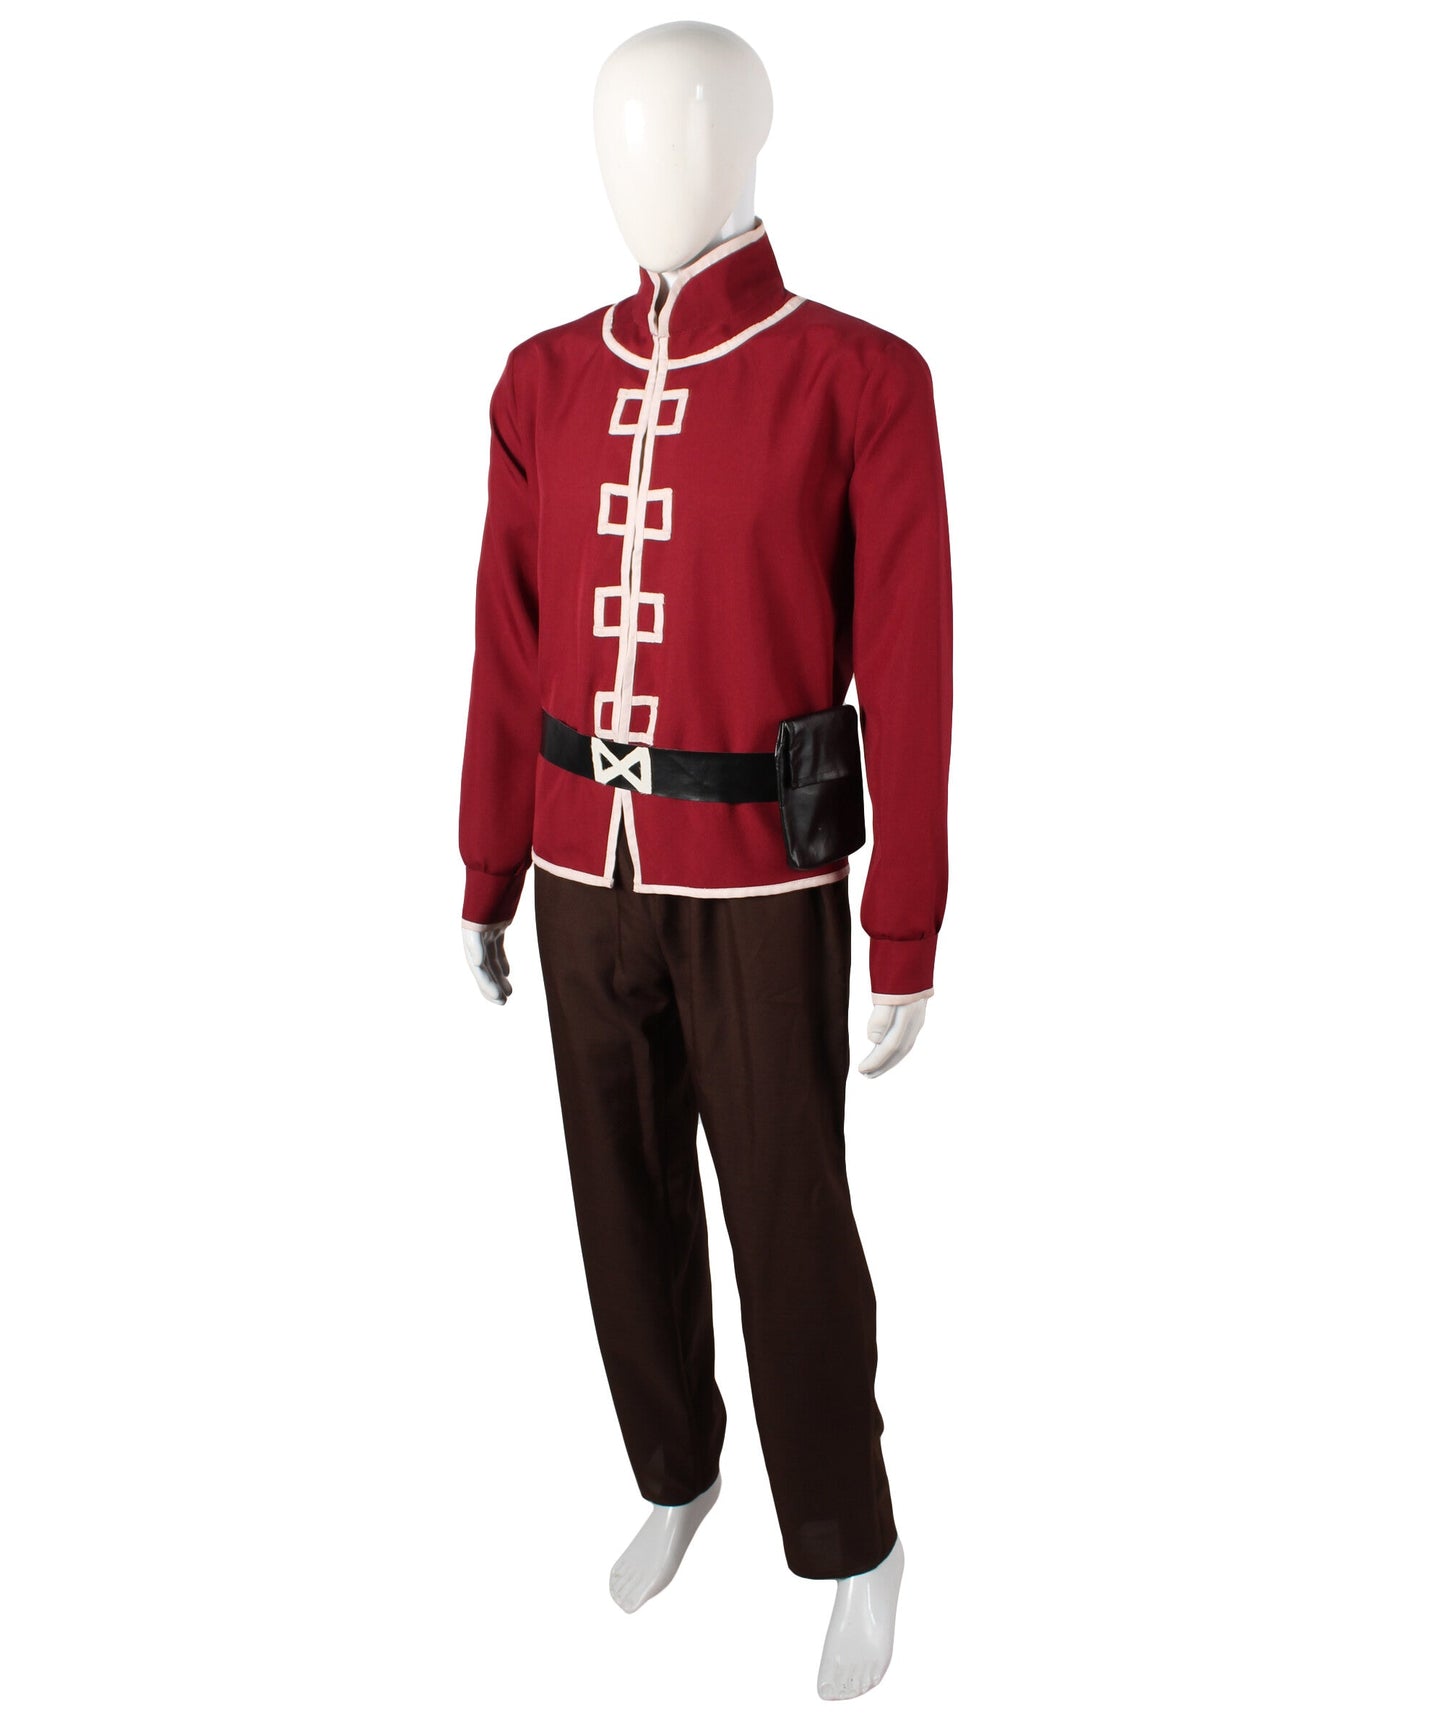 Men’s Fantasy Animated Series Crown Prince Costume | Perfect for Halloween and Fancy